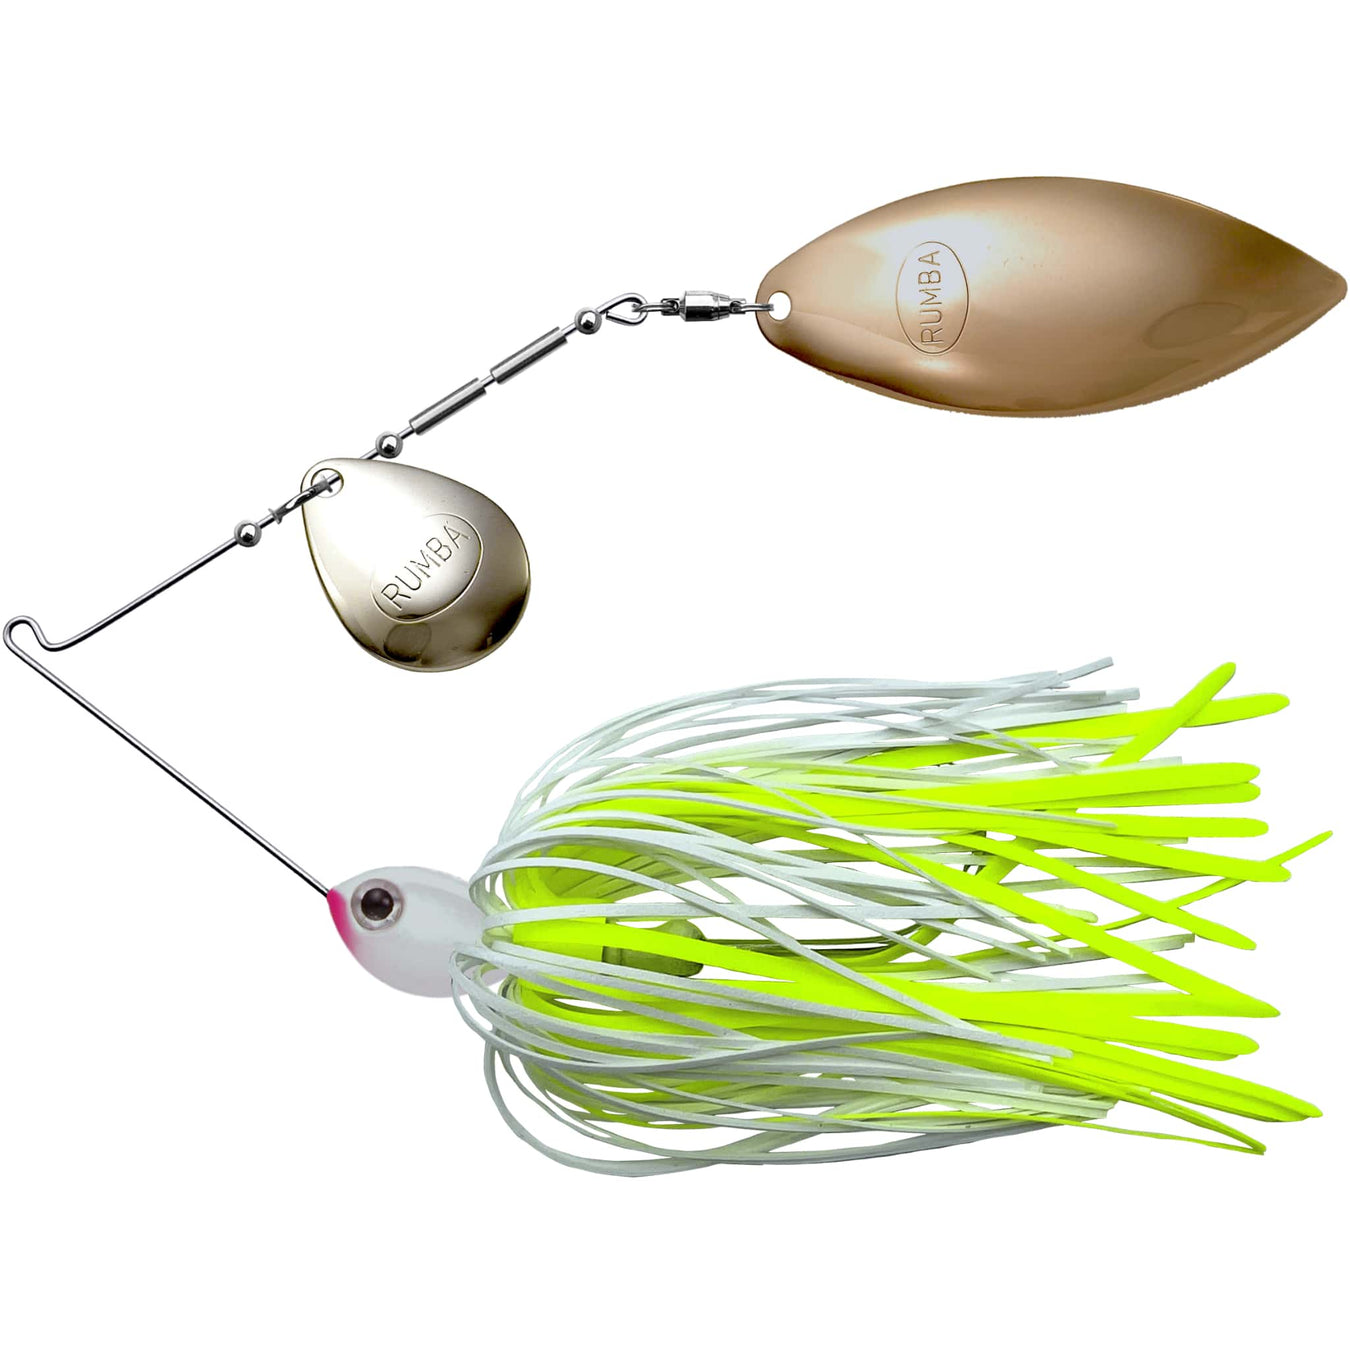 The Original Spinnerbait Fishing Lures-White/Chartreuse Silicone Skirt, Nickel/Gold Tandem Blades